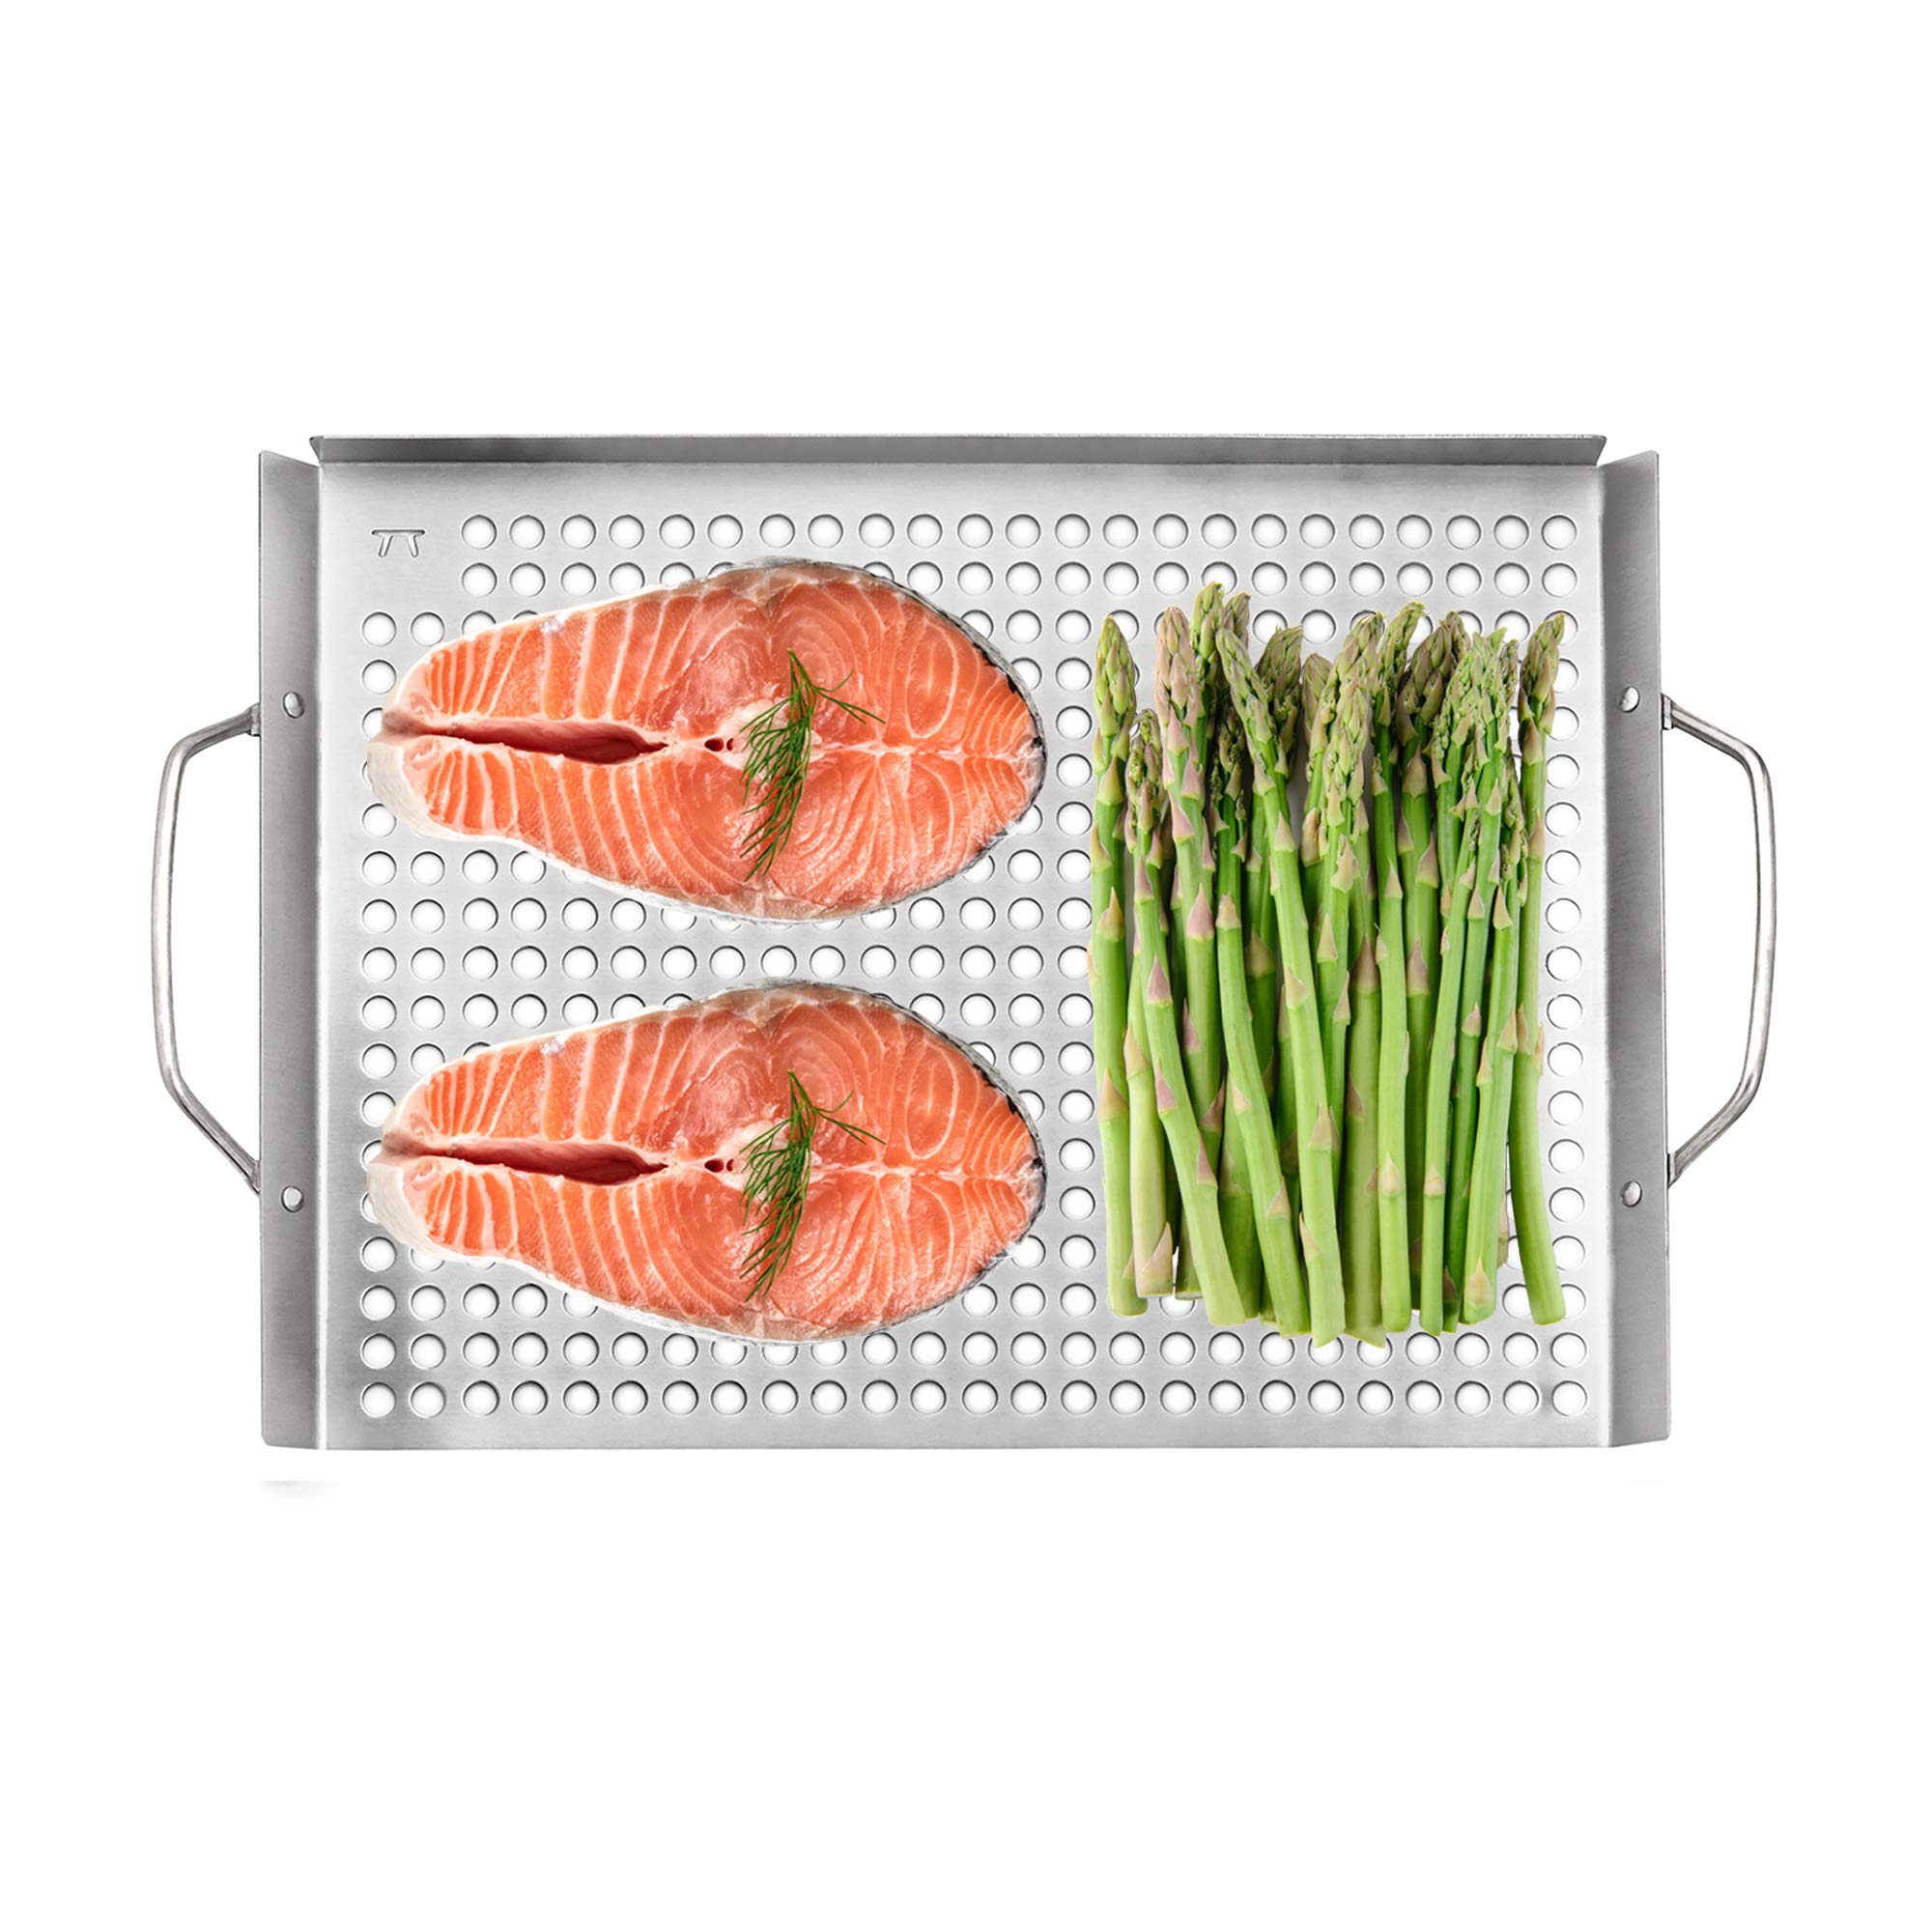 Outset 76630 Stainless Steel Grill Topper Grid, Set of 2, 11